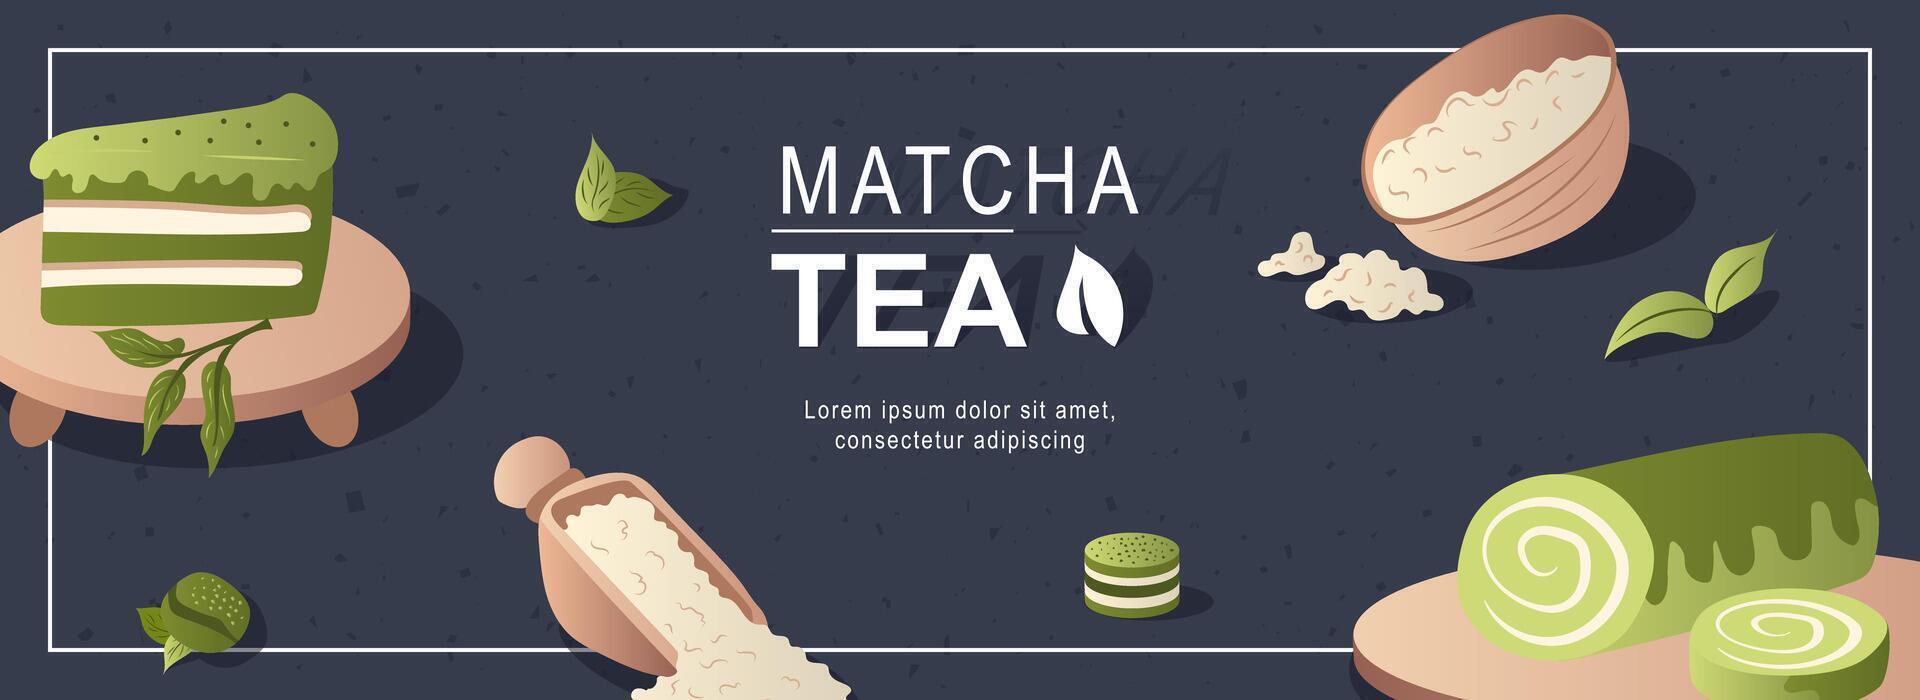 Matcha tea horizontal web banner. Green cake, powder in scoop and bowl, rolls, leaves of traditional japanese healthy drink. Vector illustration for header website, cover templates in modern design